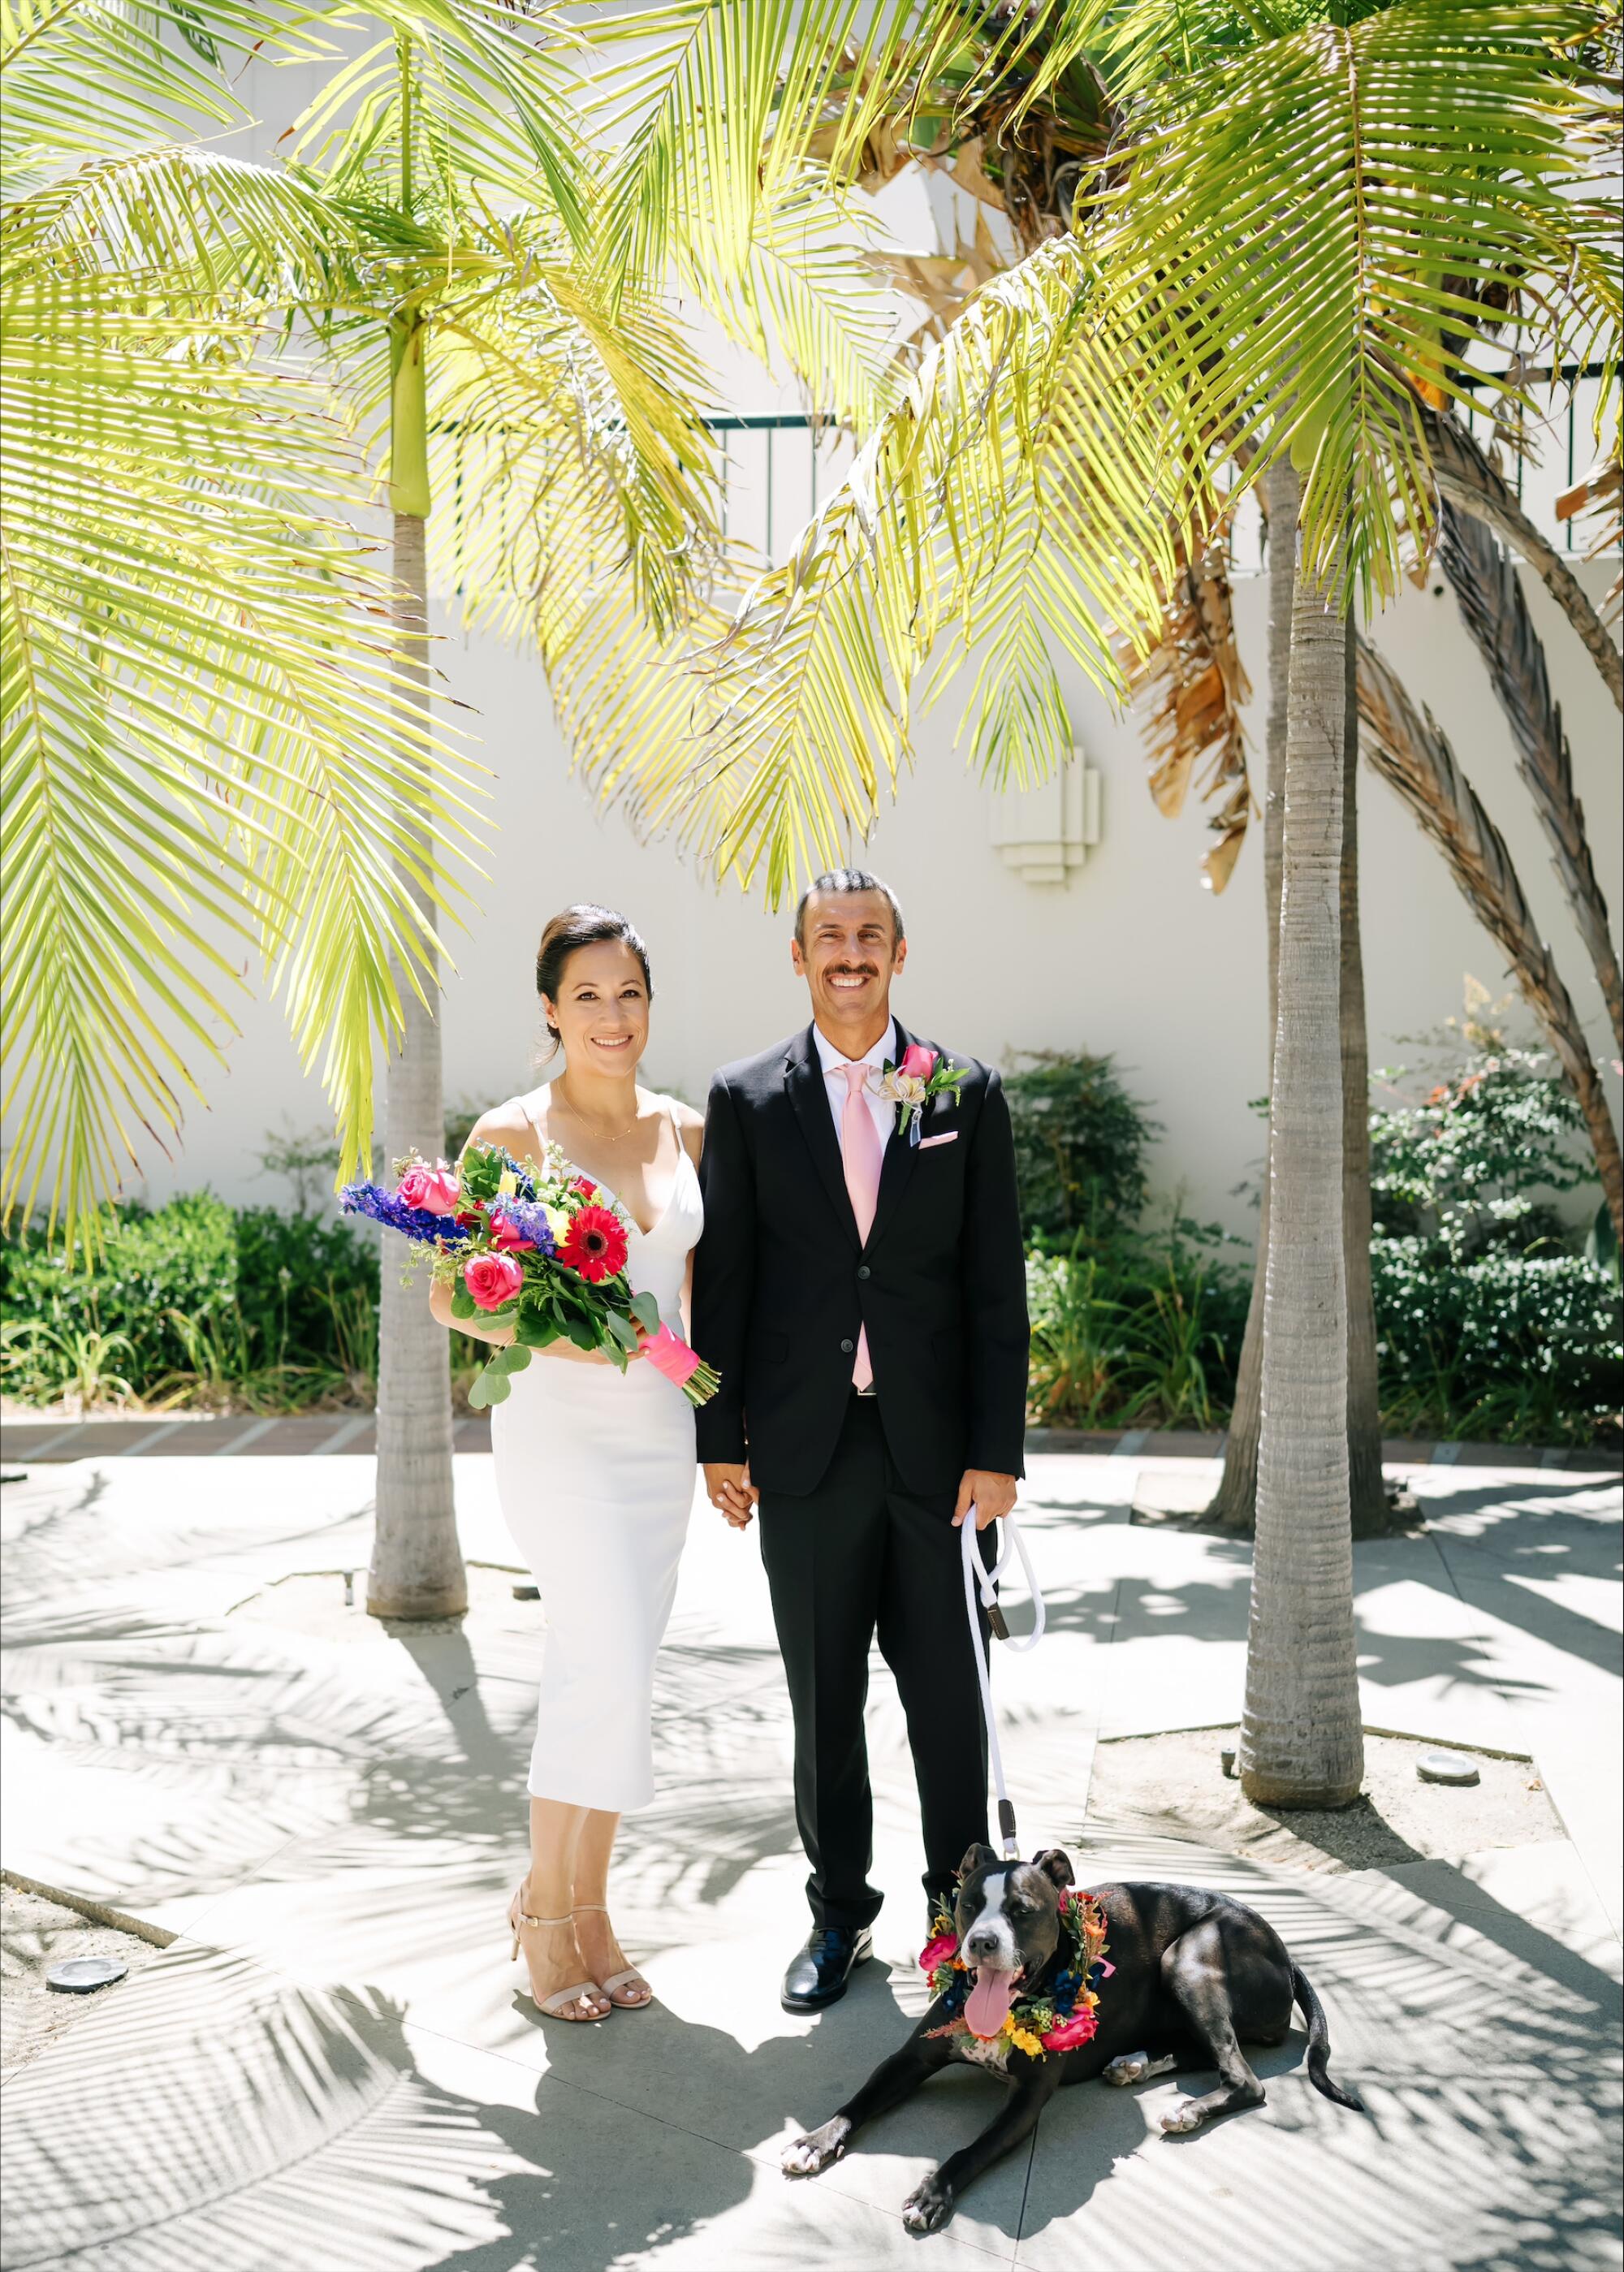 A bride and groom stand outdoors among palm trees, a dog at his feet